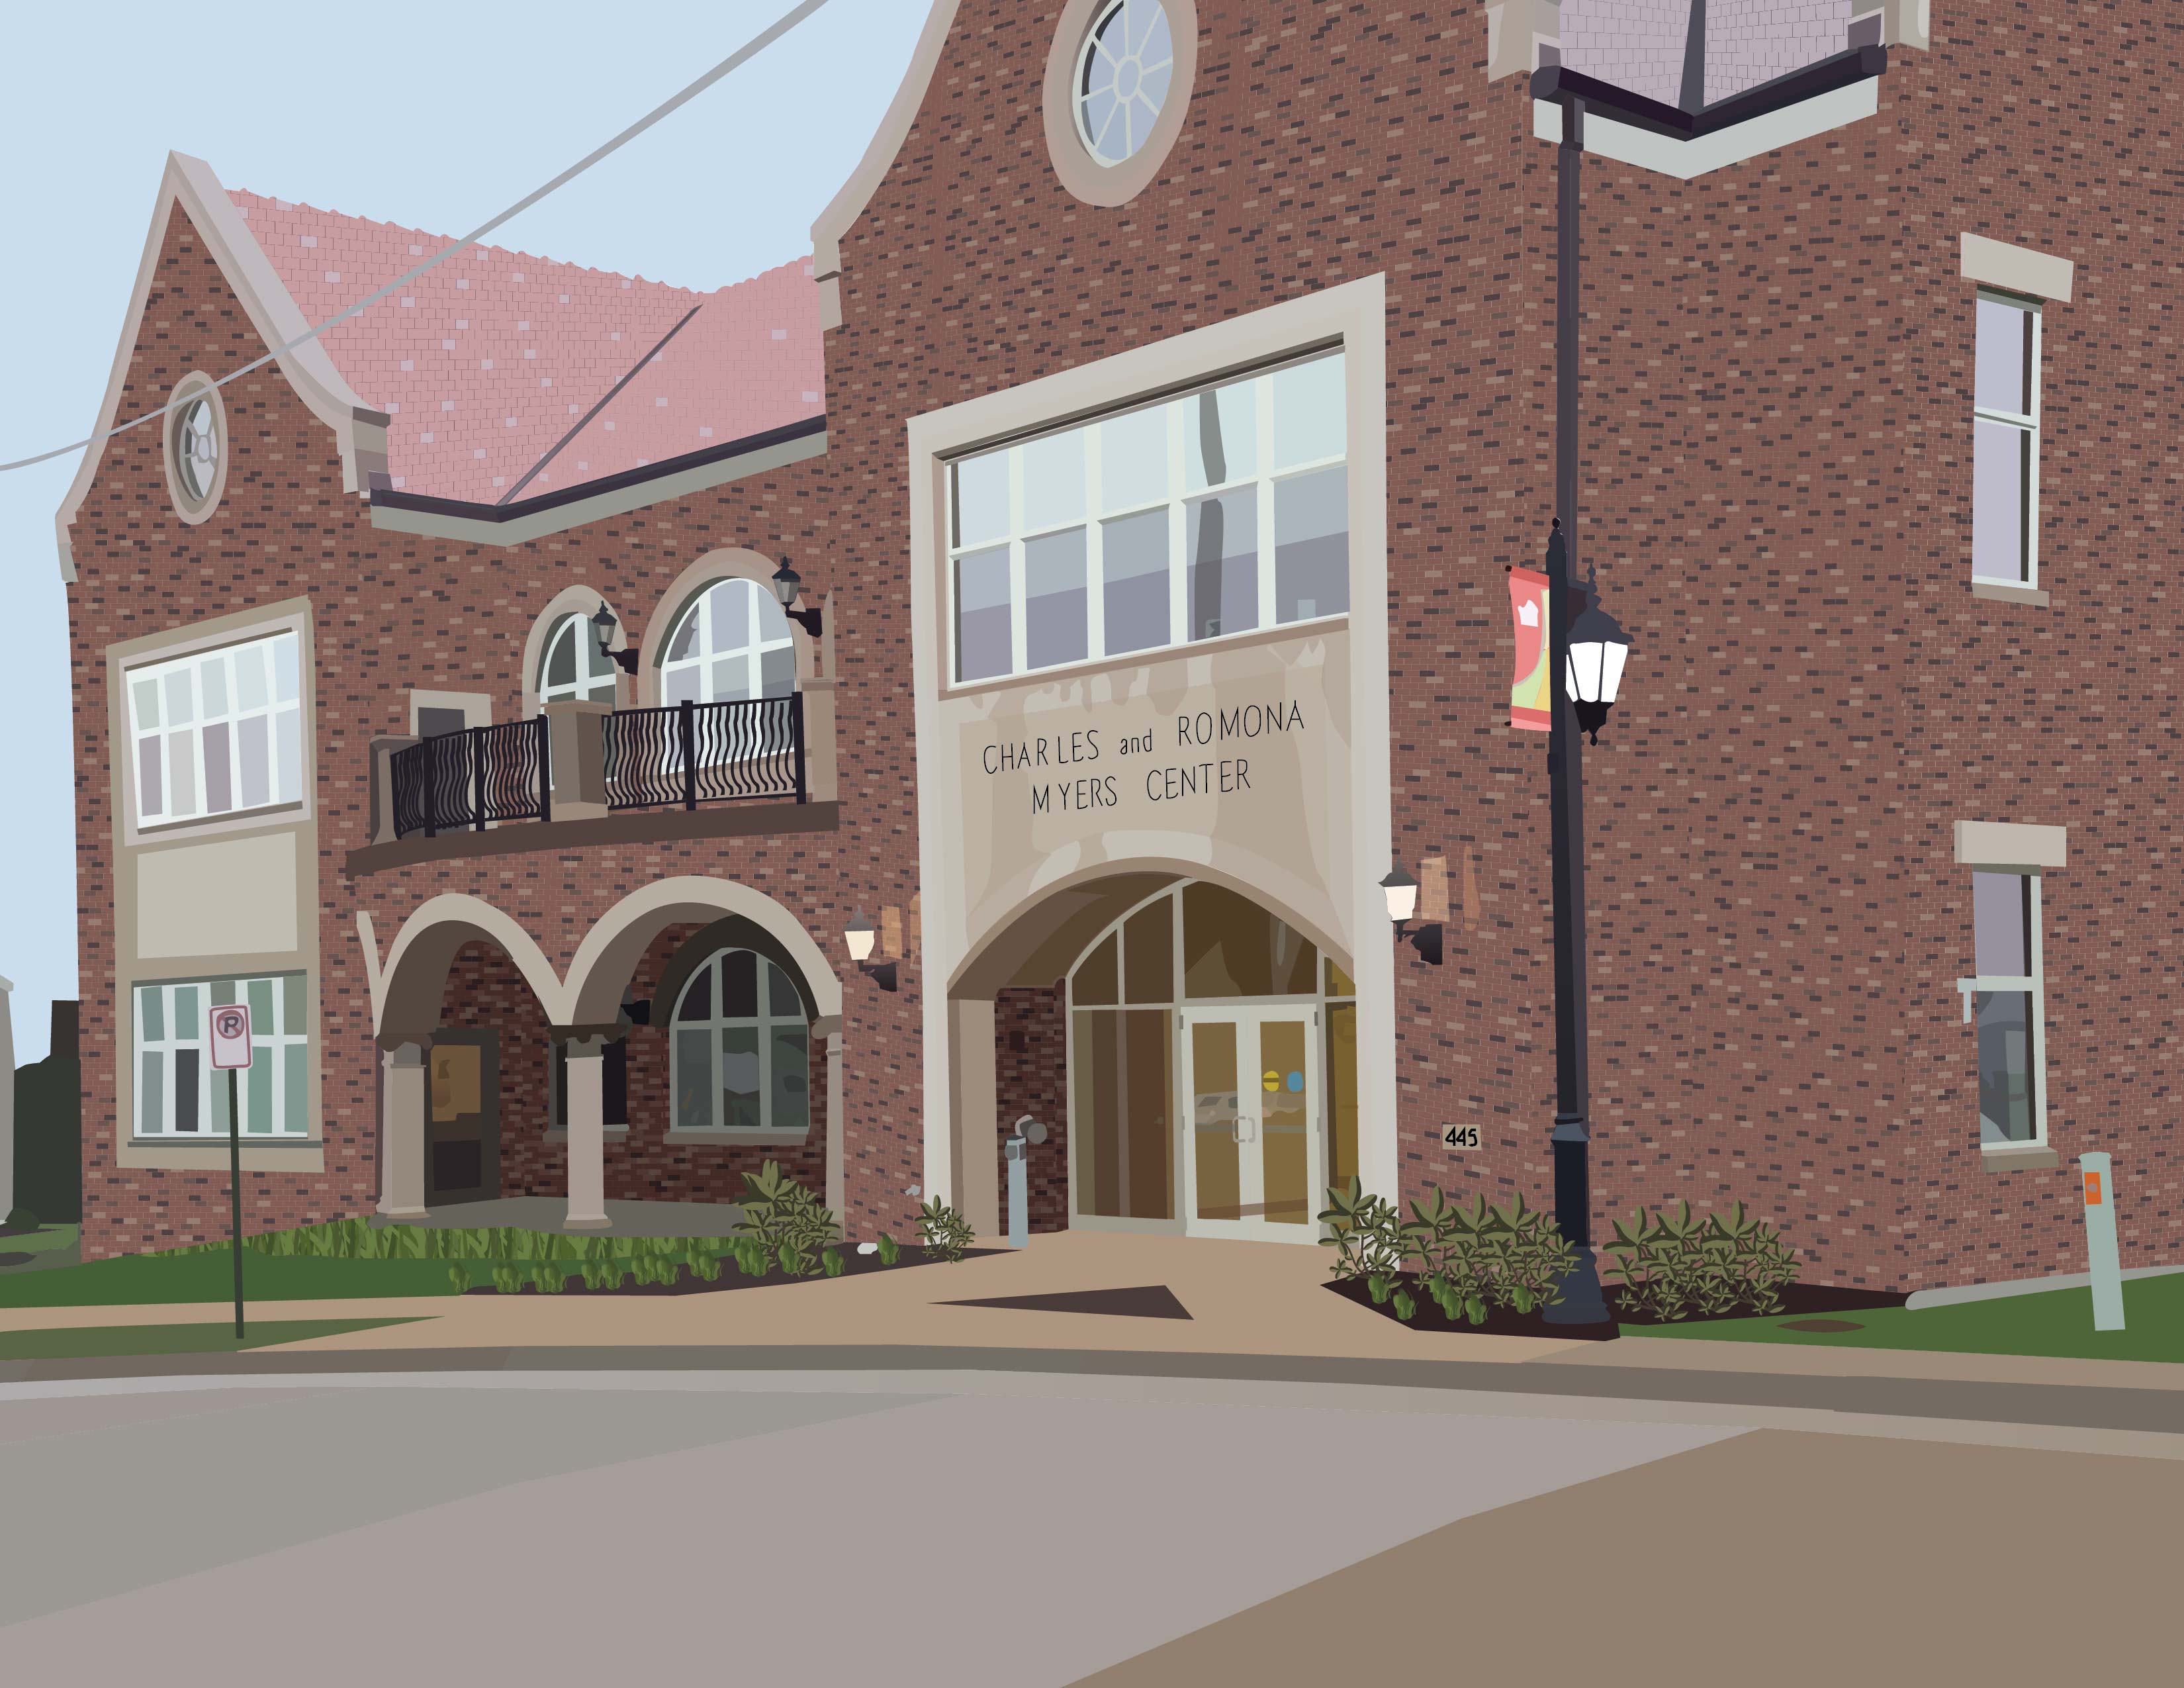 A detailed illustration of the Myers Center, located on the University of Dubuque campus.